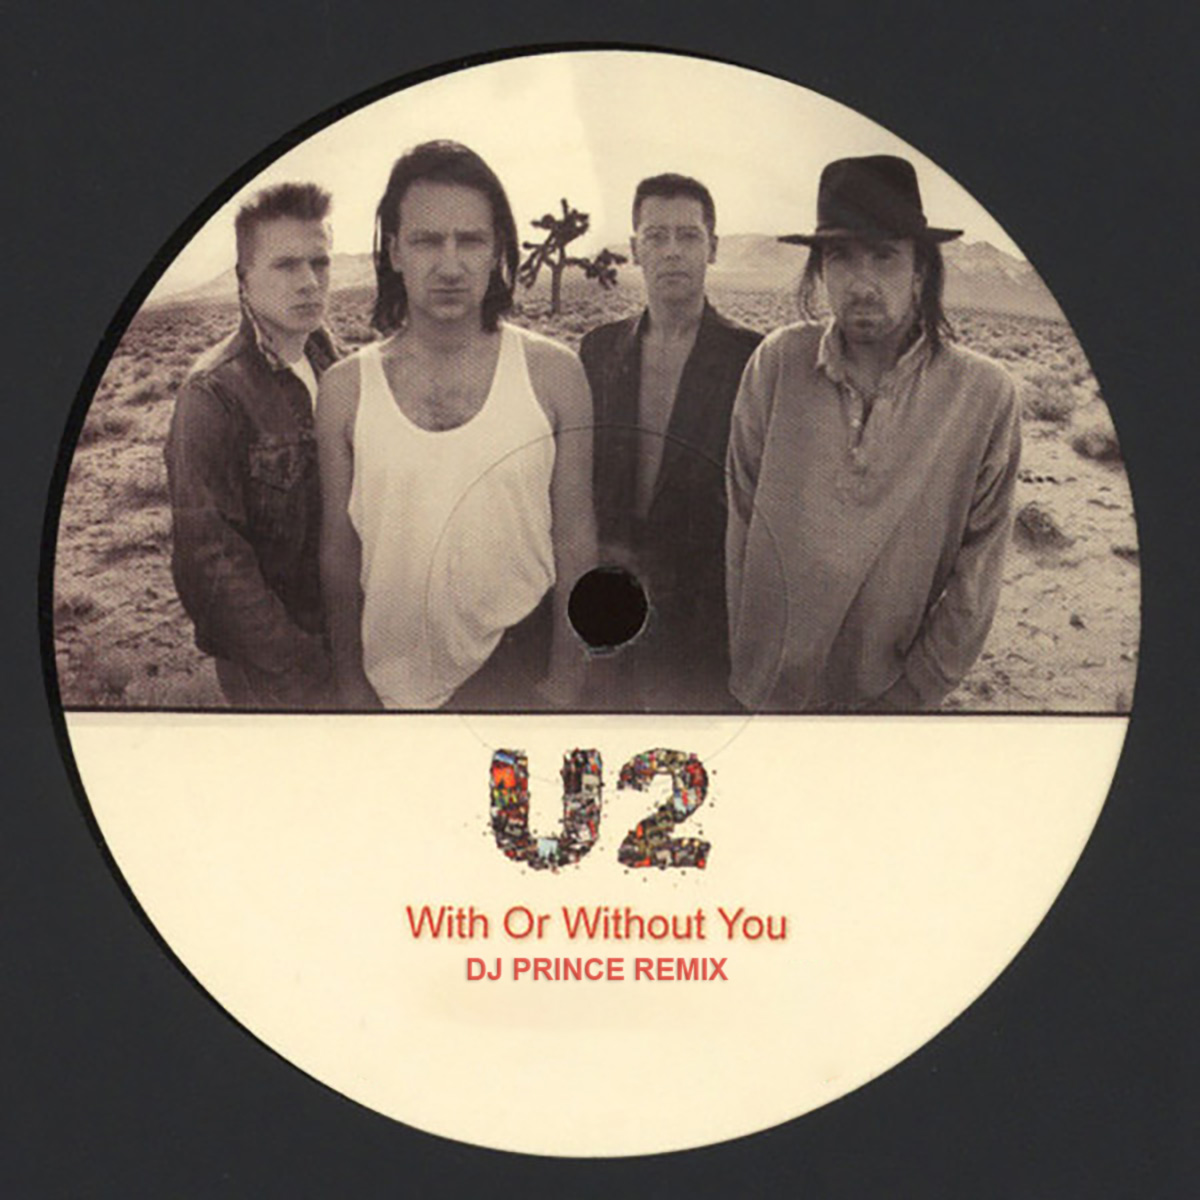 U2 - With Or Without You (DJ Prince Remix)